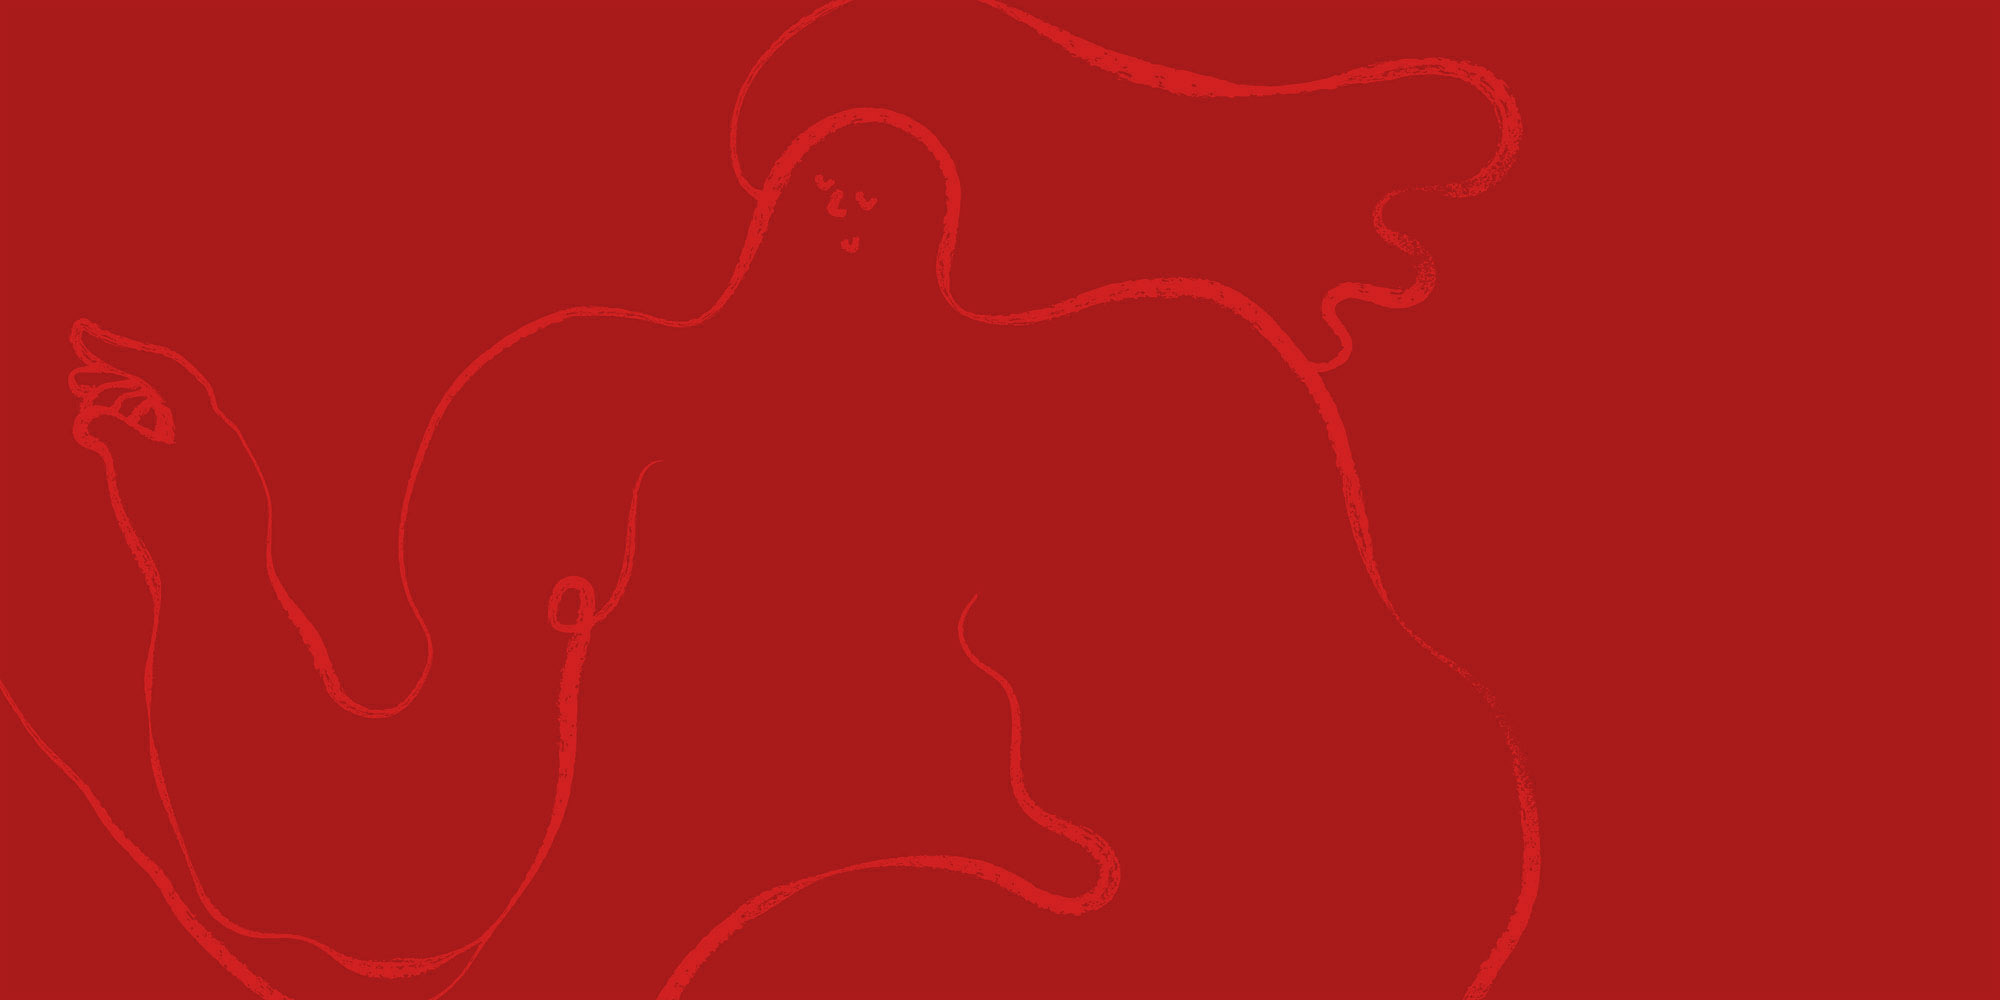 Red Abstract Human Image